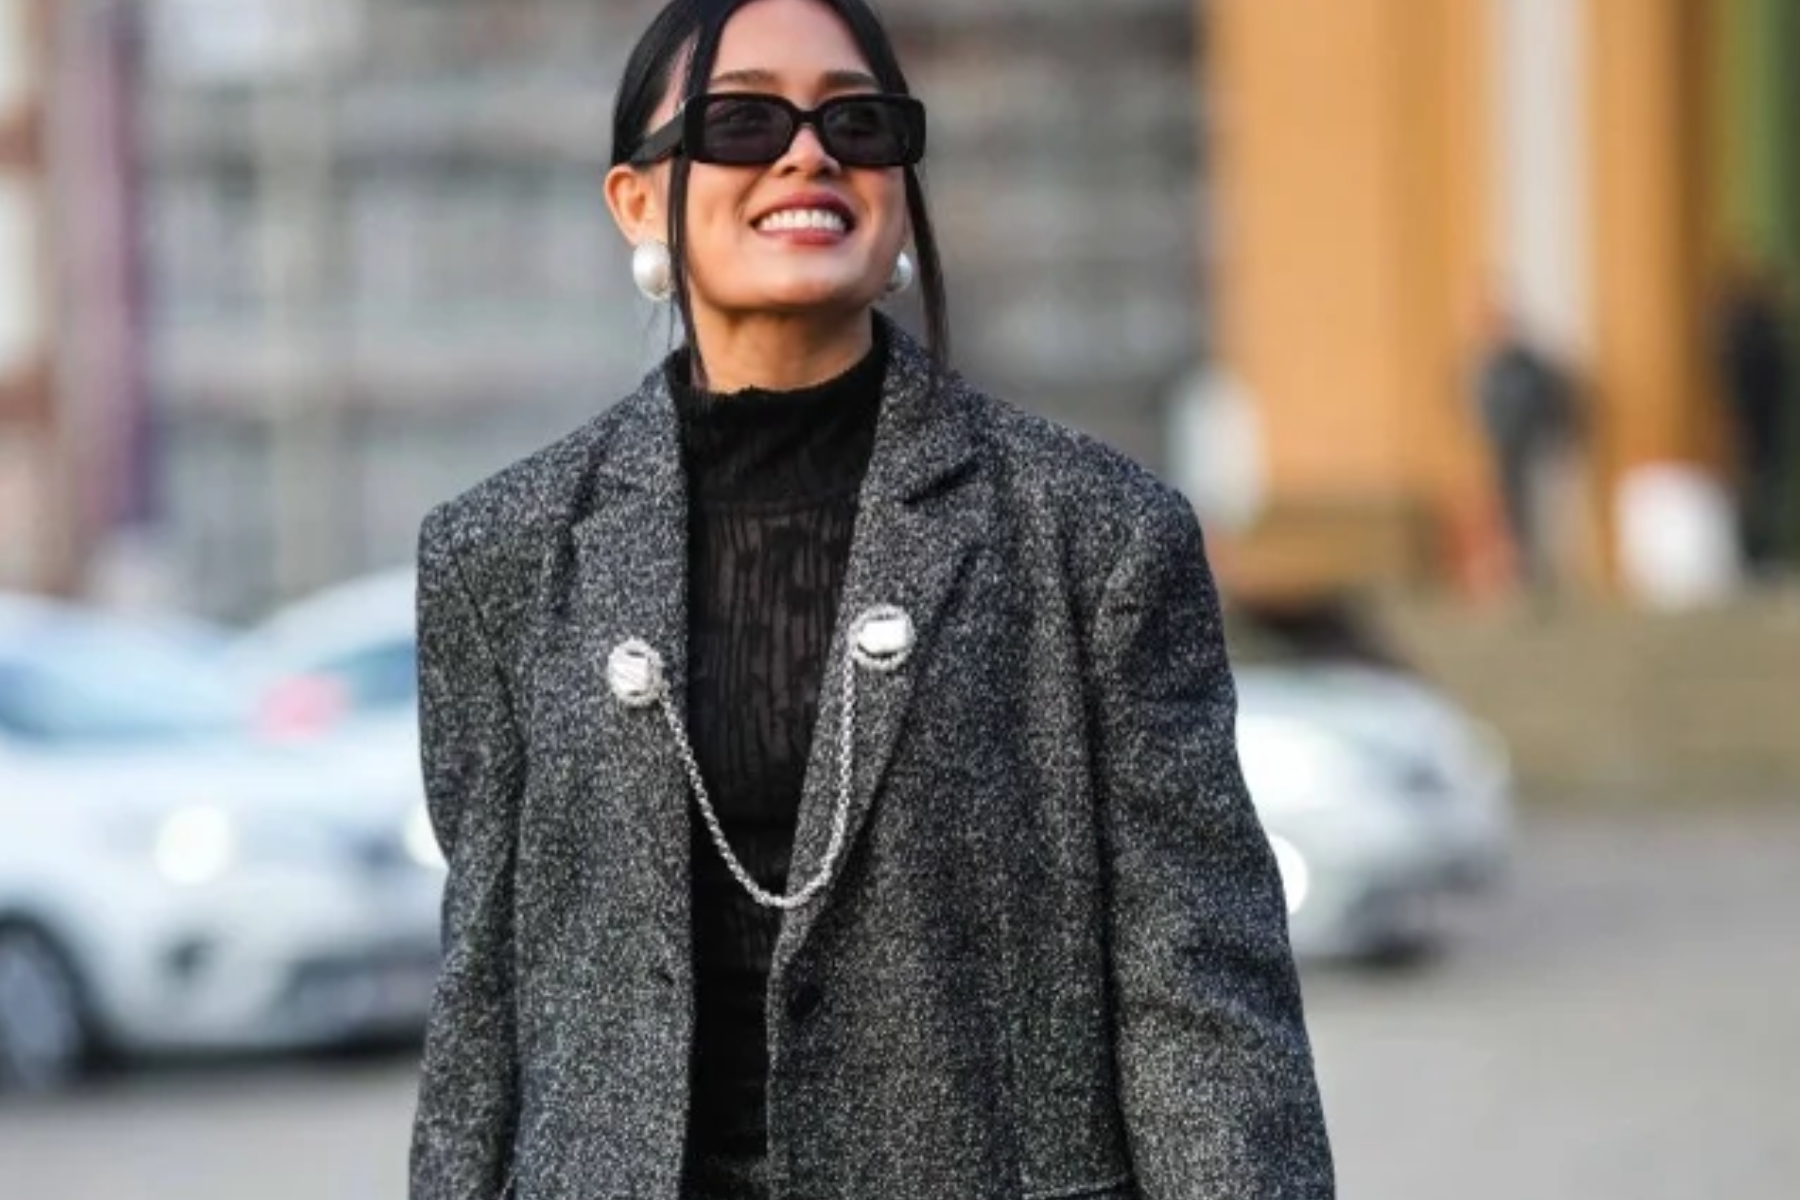 A woman walking with a chain brooch connected to her clothes